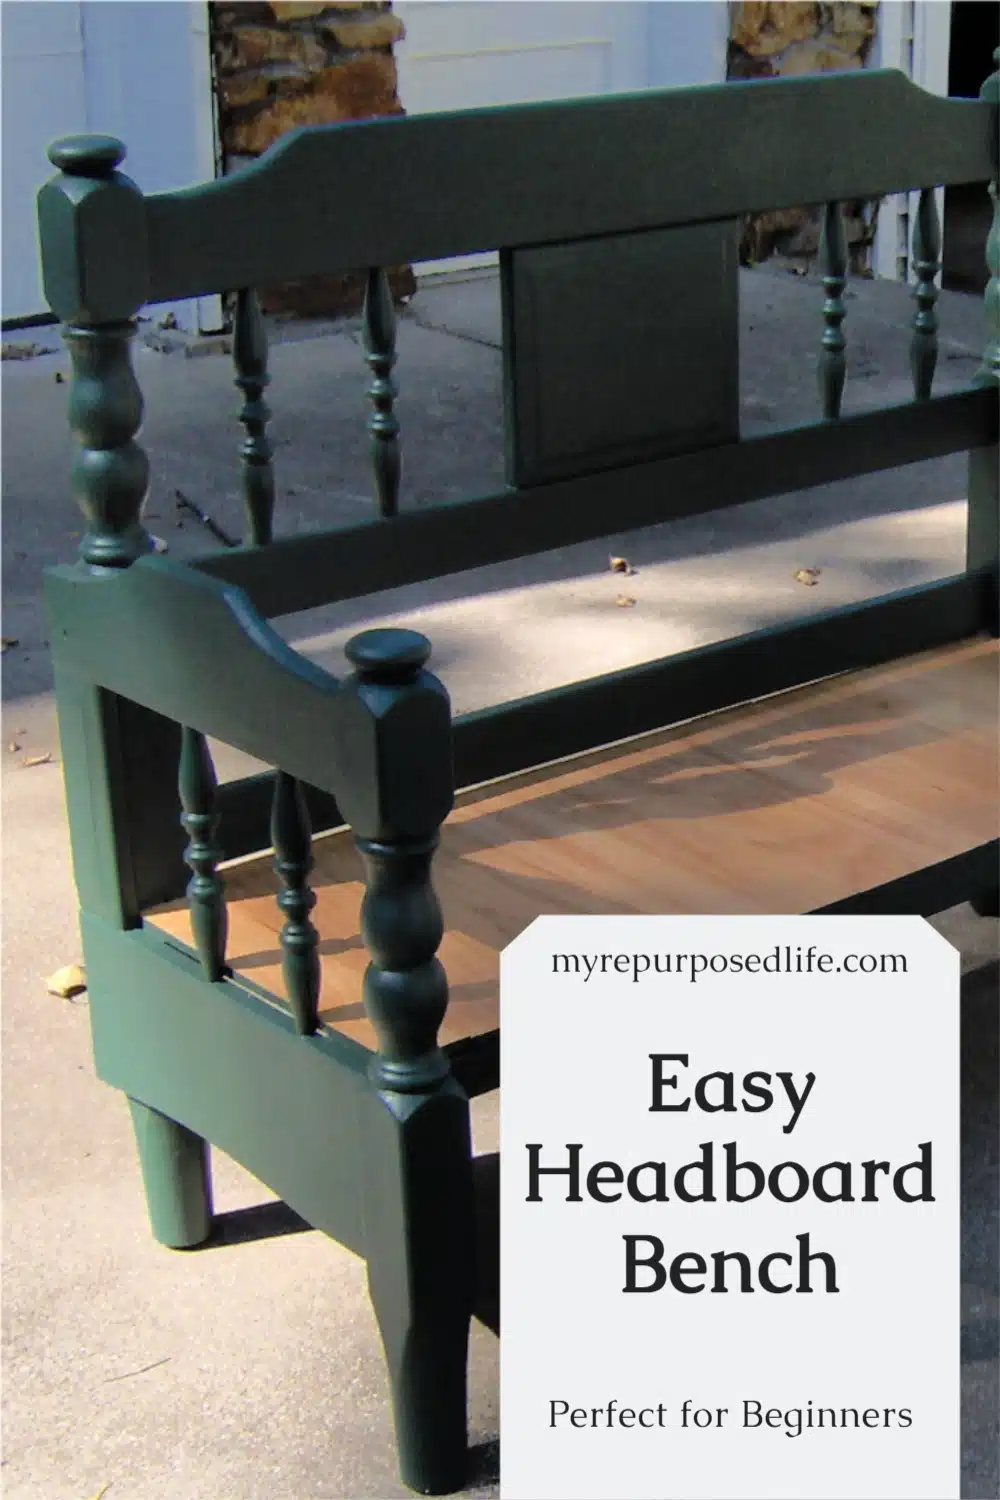 If you have been wanting to make a headboard bench, but have been intimidated by the process, this might be just what you've been looking for! No special tools needed. Only a saw and a drill. #MyRepurposedLife #repurposed #headboard #bench #diy #easy via @repurposedlife